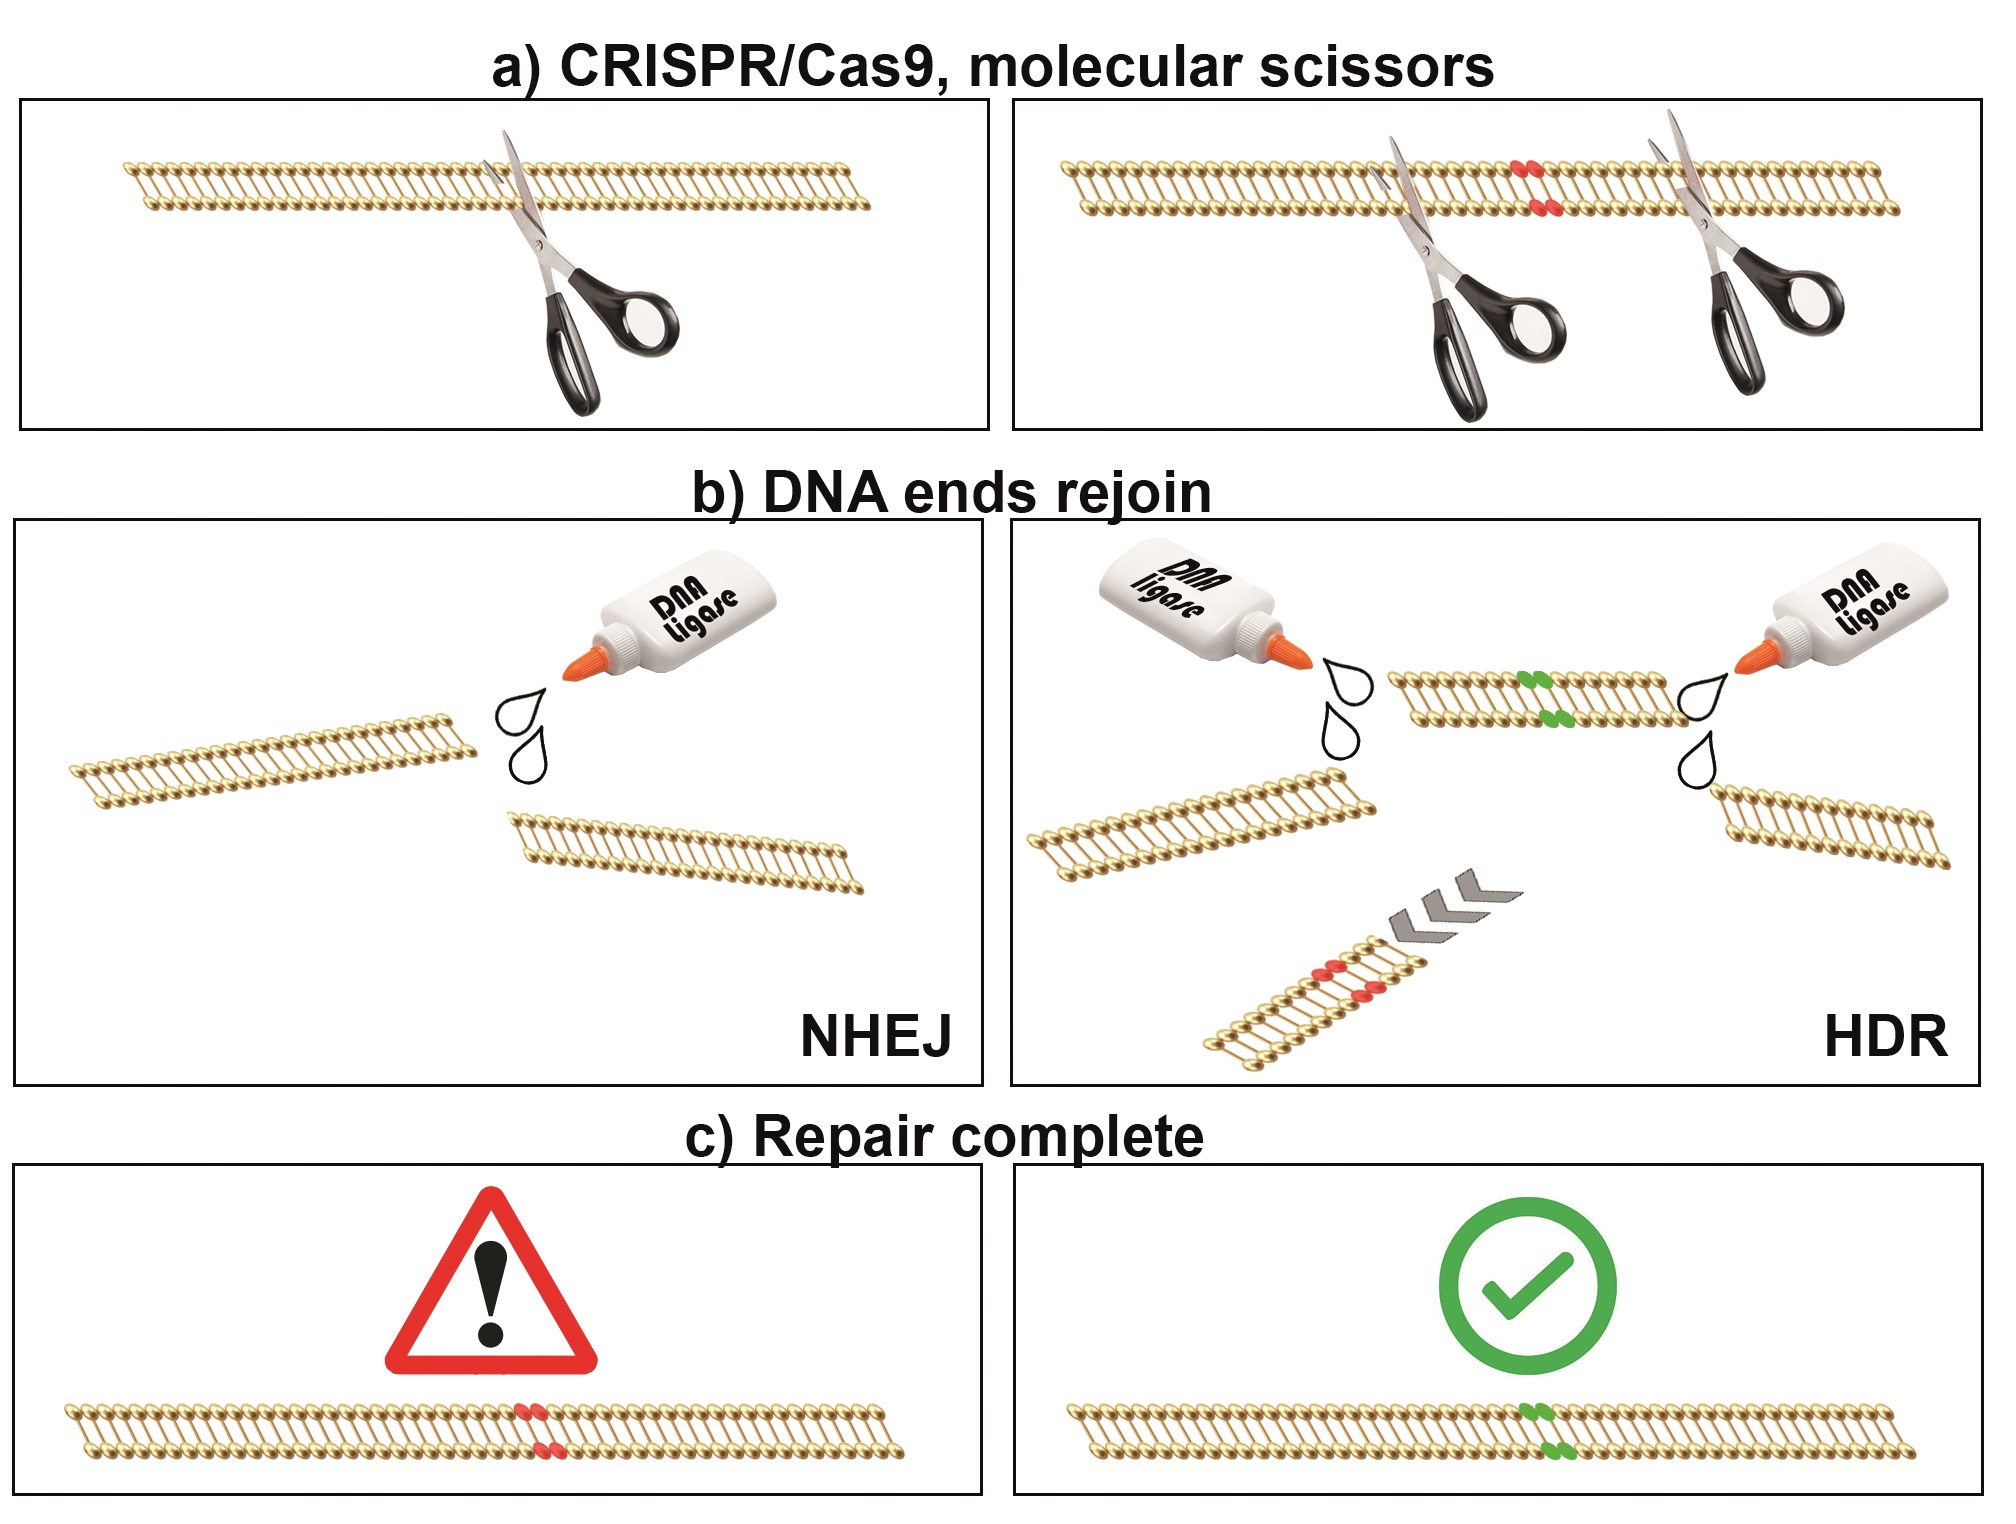 A simplified schematic of CRISPR/Cas9-directed genome editing. (a) CRISPR/Cas9 complex is used to target genomic DNA breaks, like ‘tiny molecular scissors’. (b) DNA breaks can be repaired by either nonhomologous end joining (NHEJ, left) or homology-directed repair (HDR, right). (c) NHEJ is error prone, resulting in mutations in targeted genes, permitting gene function experiments. HDR can be used to replace genetic information, mimicking or correcting pathogenic sequences (e.g. for disease model